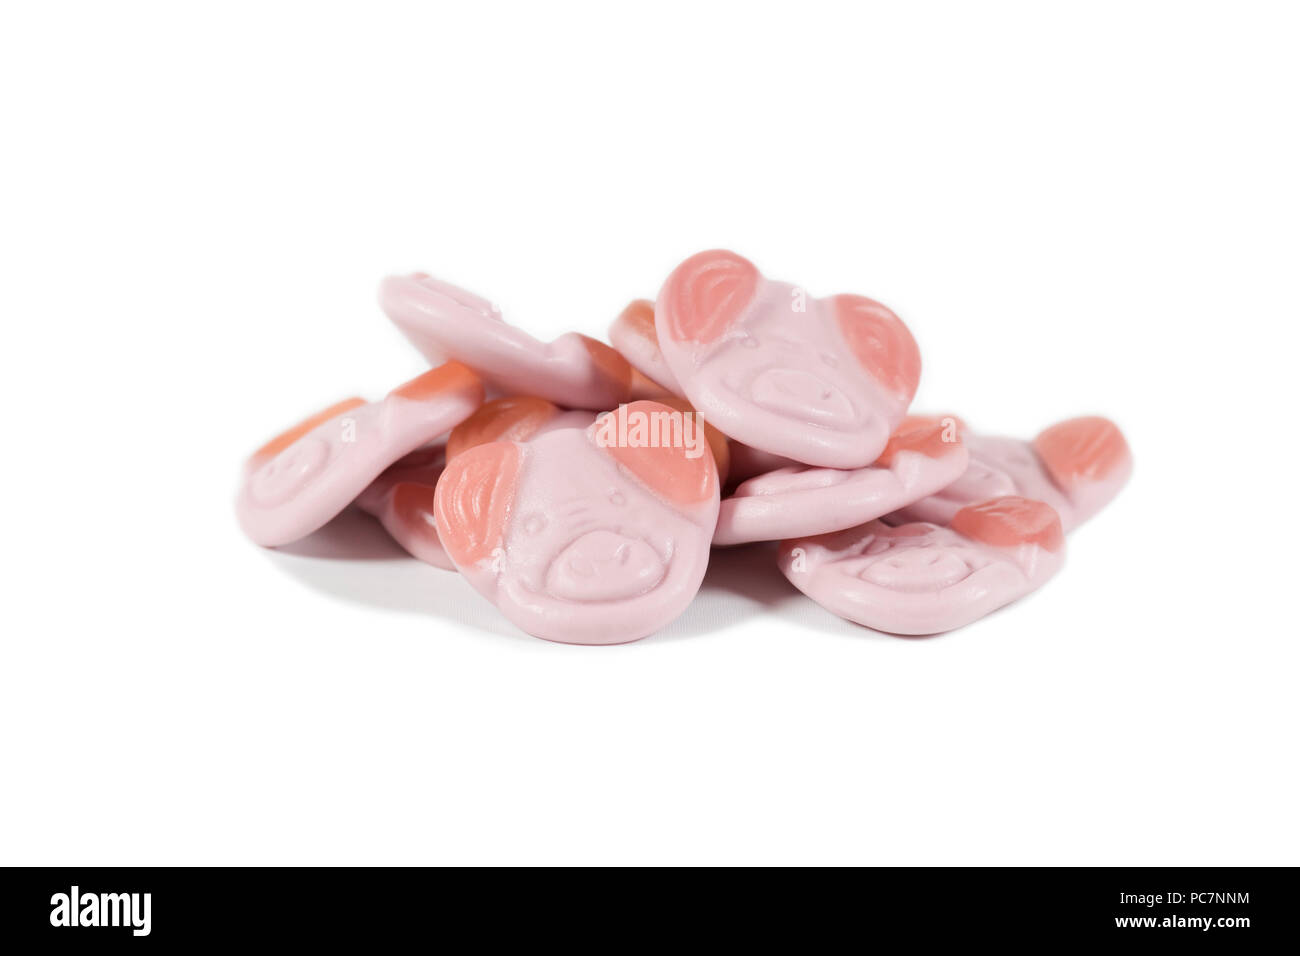 Percy pig sweets on isolated white background Stock Photo